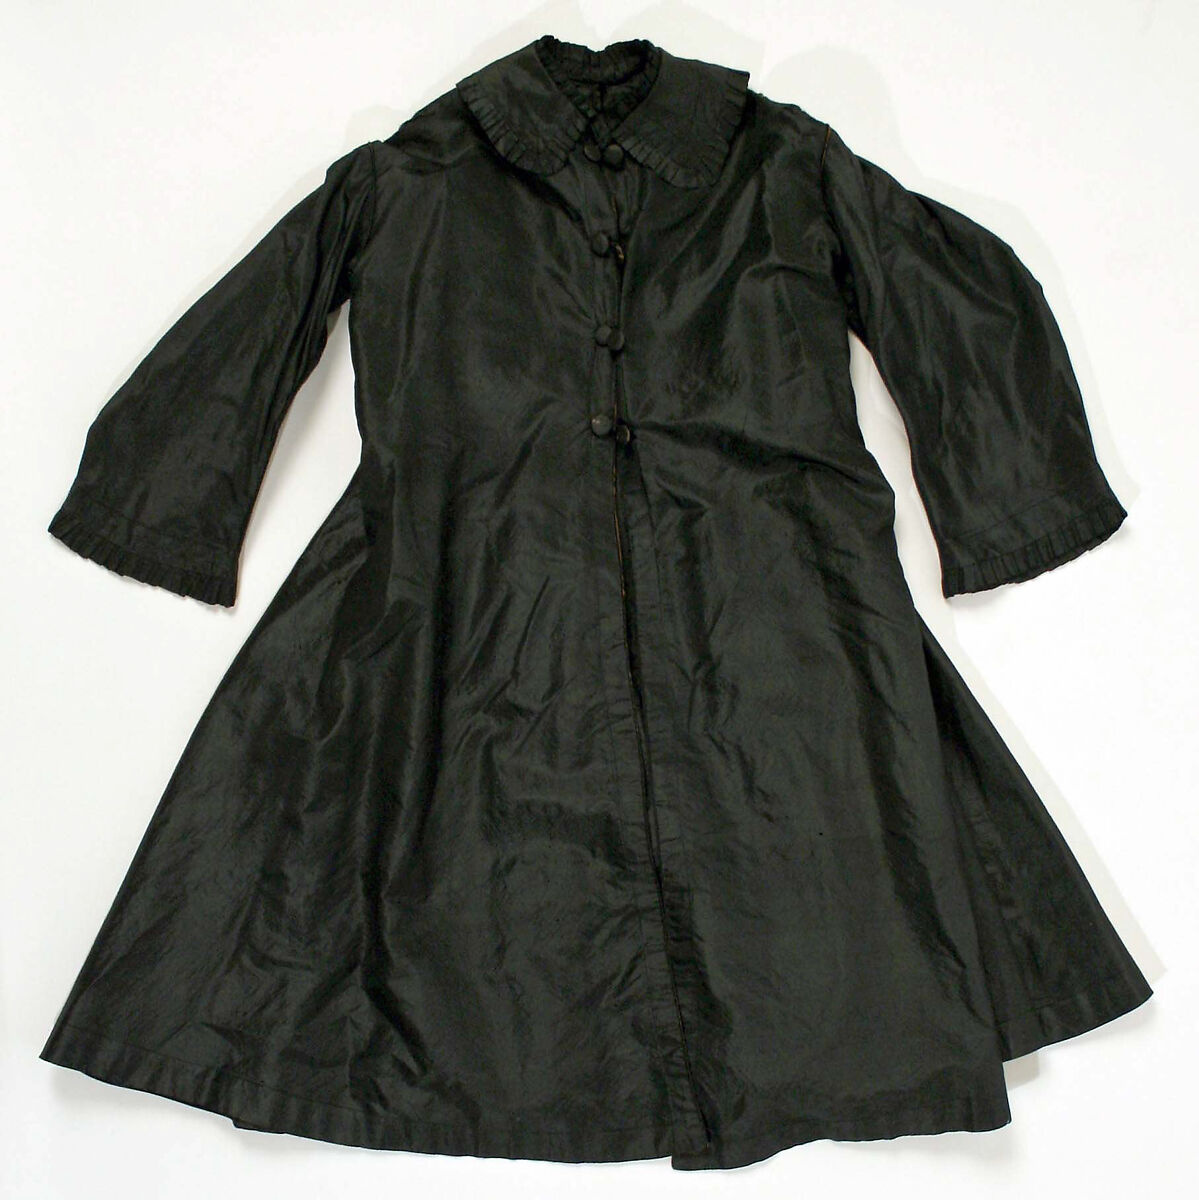 Mourning coat, [no medium available], American 